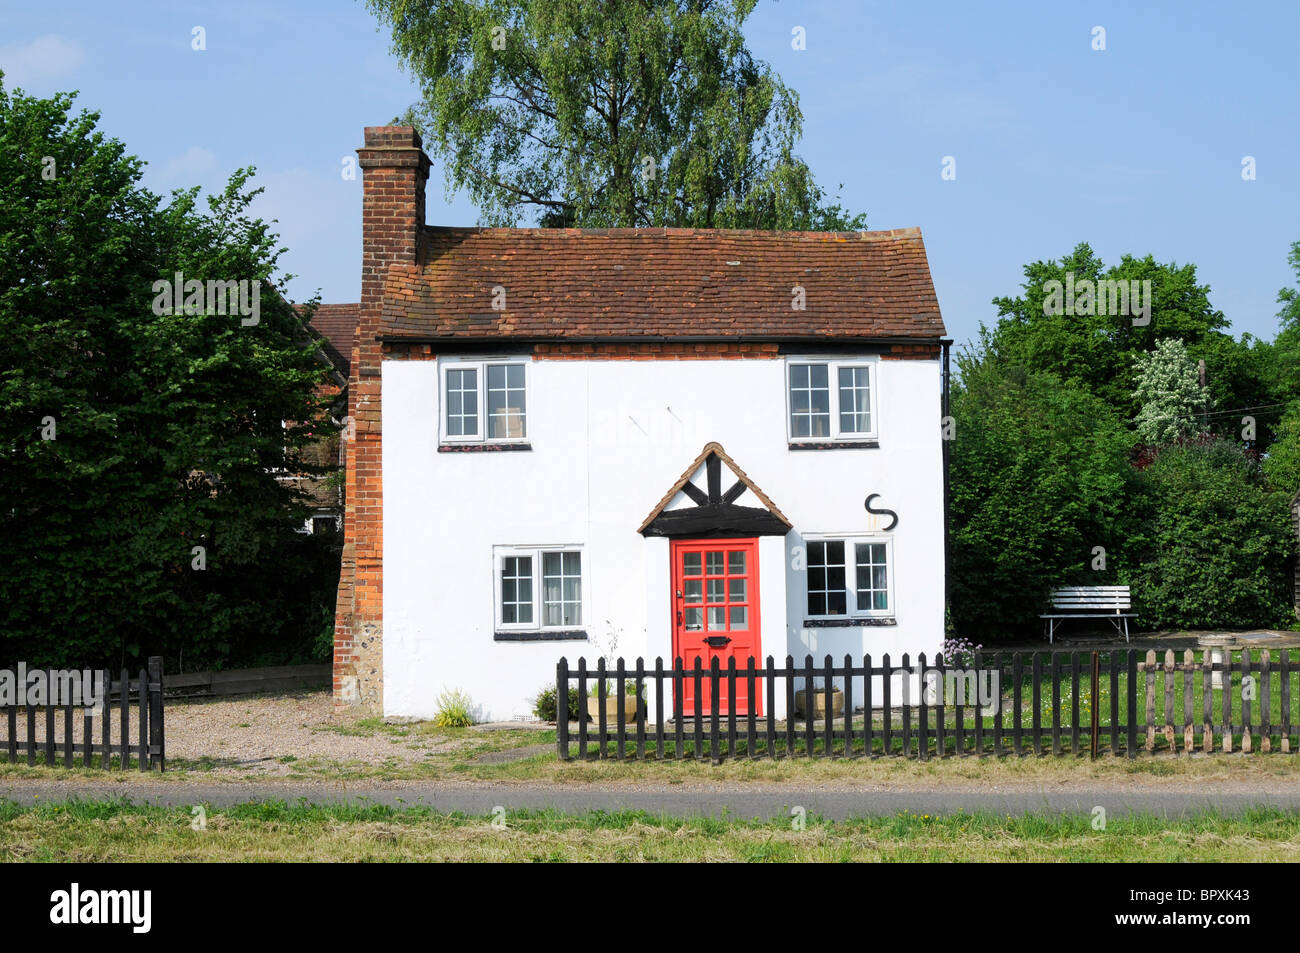 A white tiled English country cottage with red door and garden seen from the front. Stock Photo